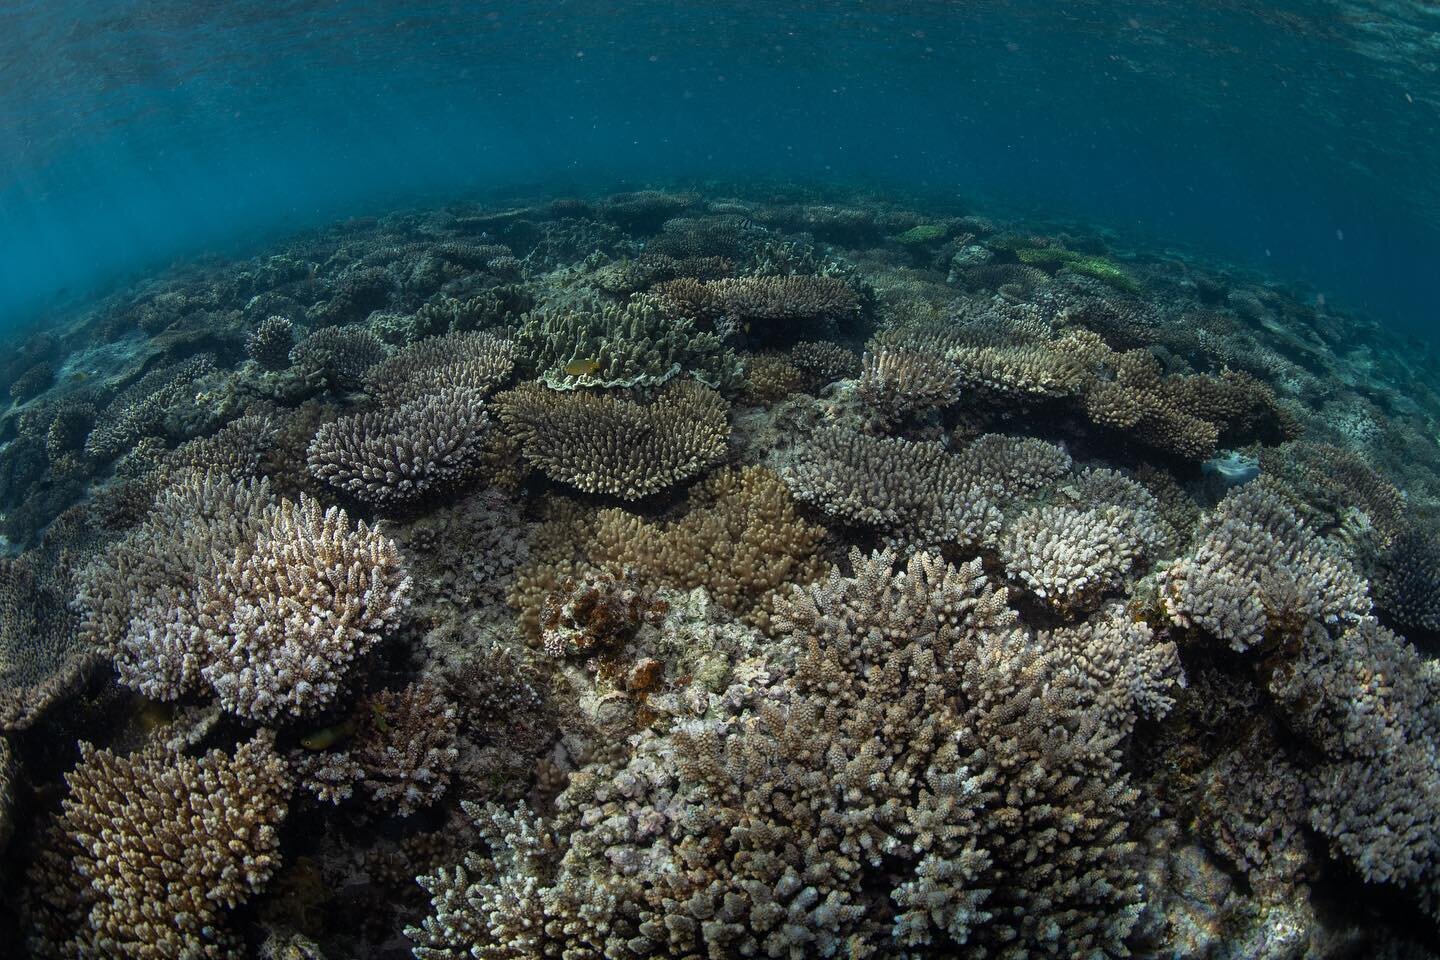 Incredible shallow water corals on the Ningaloo Reef. 

Although the diversity is relatively low, finding healthy shallow reefs these days is becoming more and more difficult in my experience. 

#ningaloo #ningalooreef #exmouth #underwater #underwate